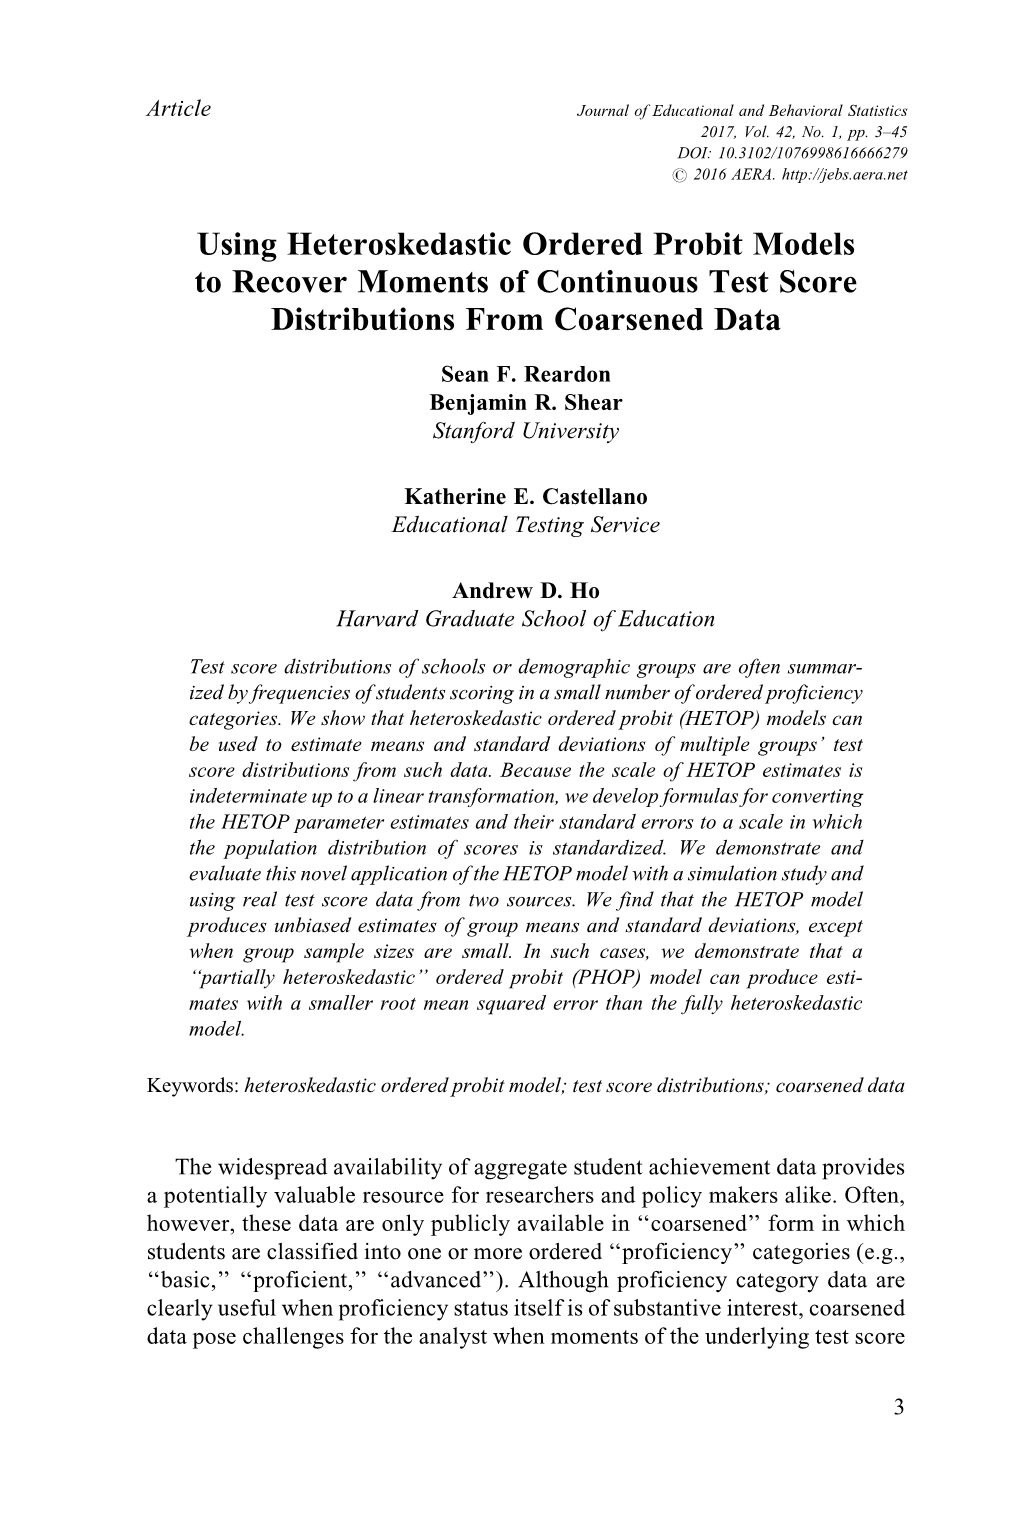 Using Heteroskedastic Ordered Probit Models to Recover Moments of Continuous Test Score Distributions from Coarsened Data